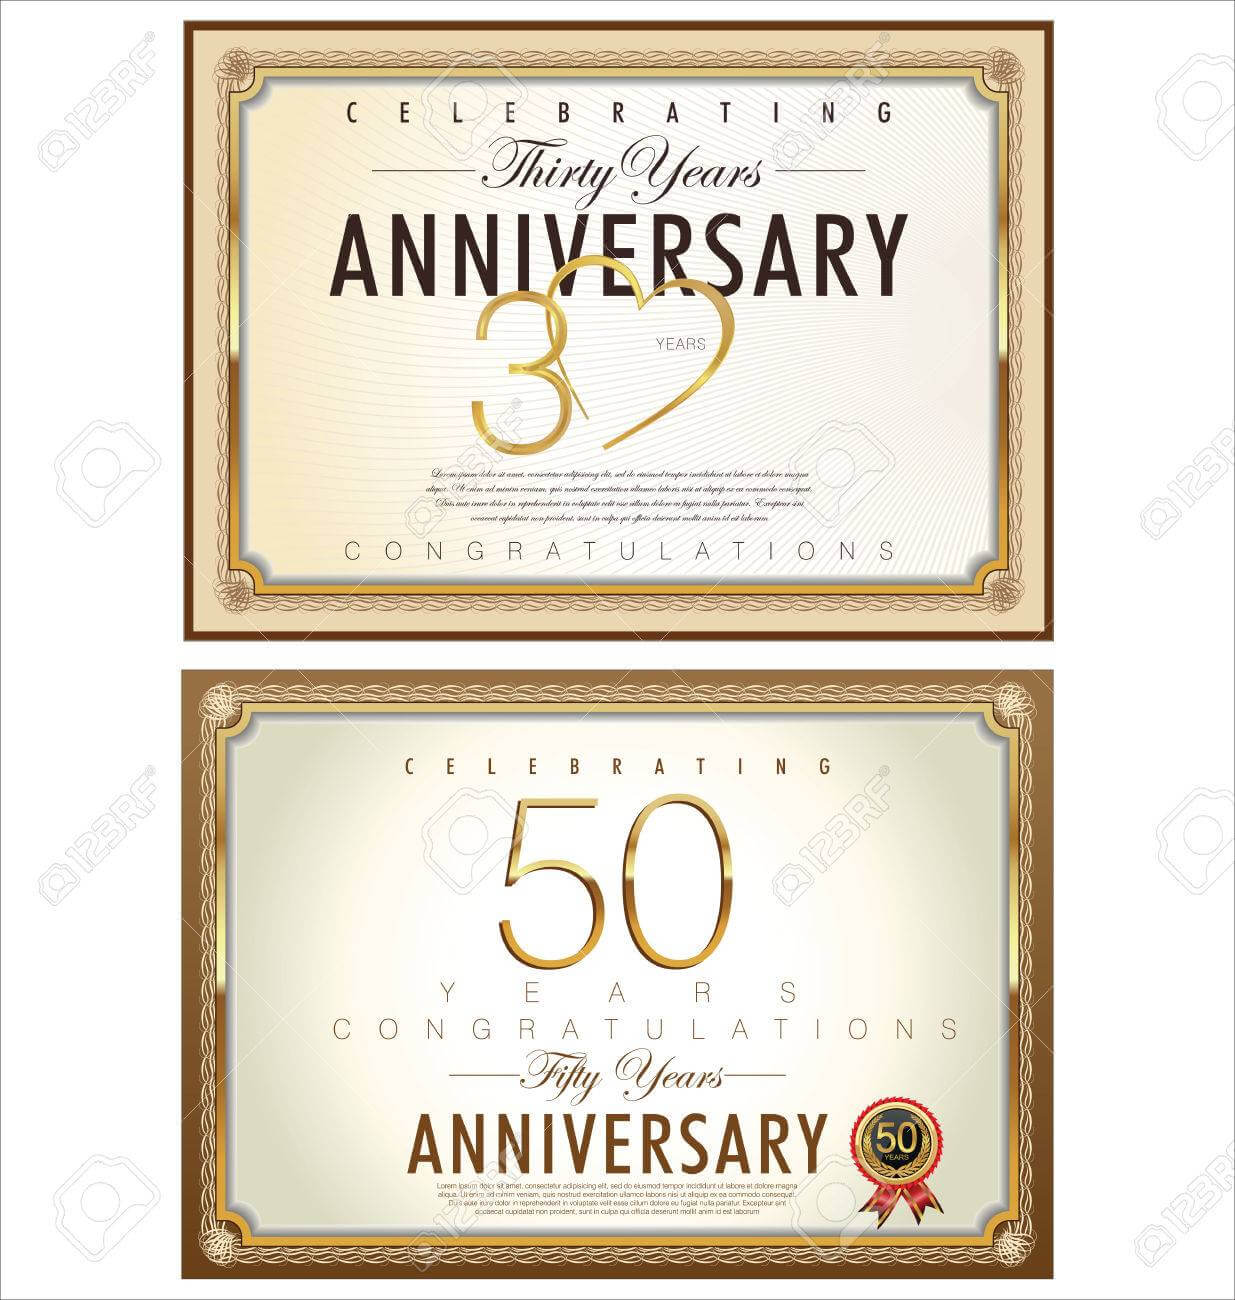 Anniversary Certificate Template Intended For Anniversary Certificate Template Free